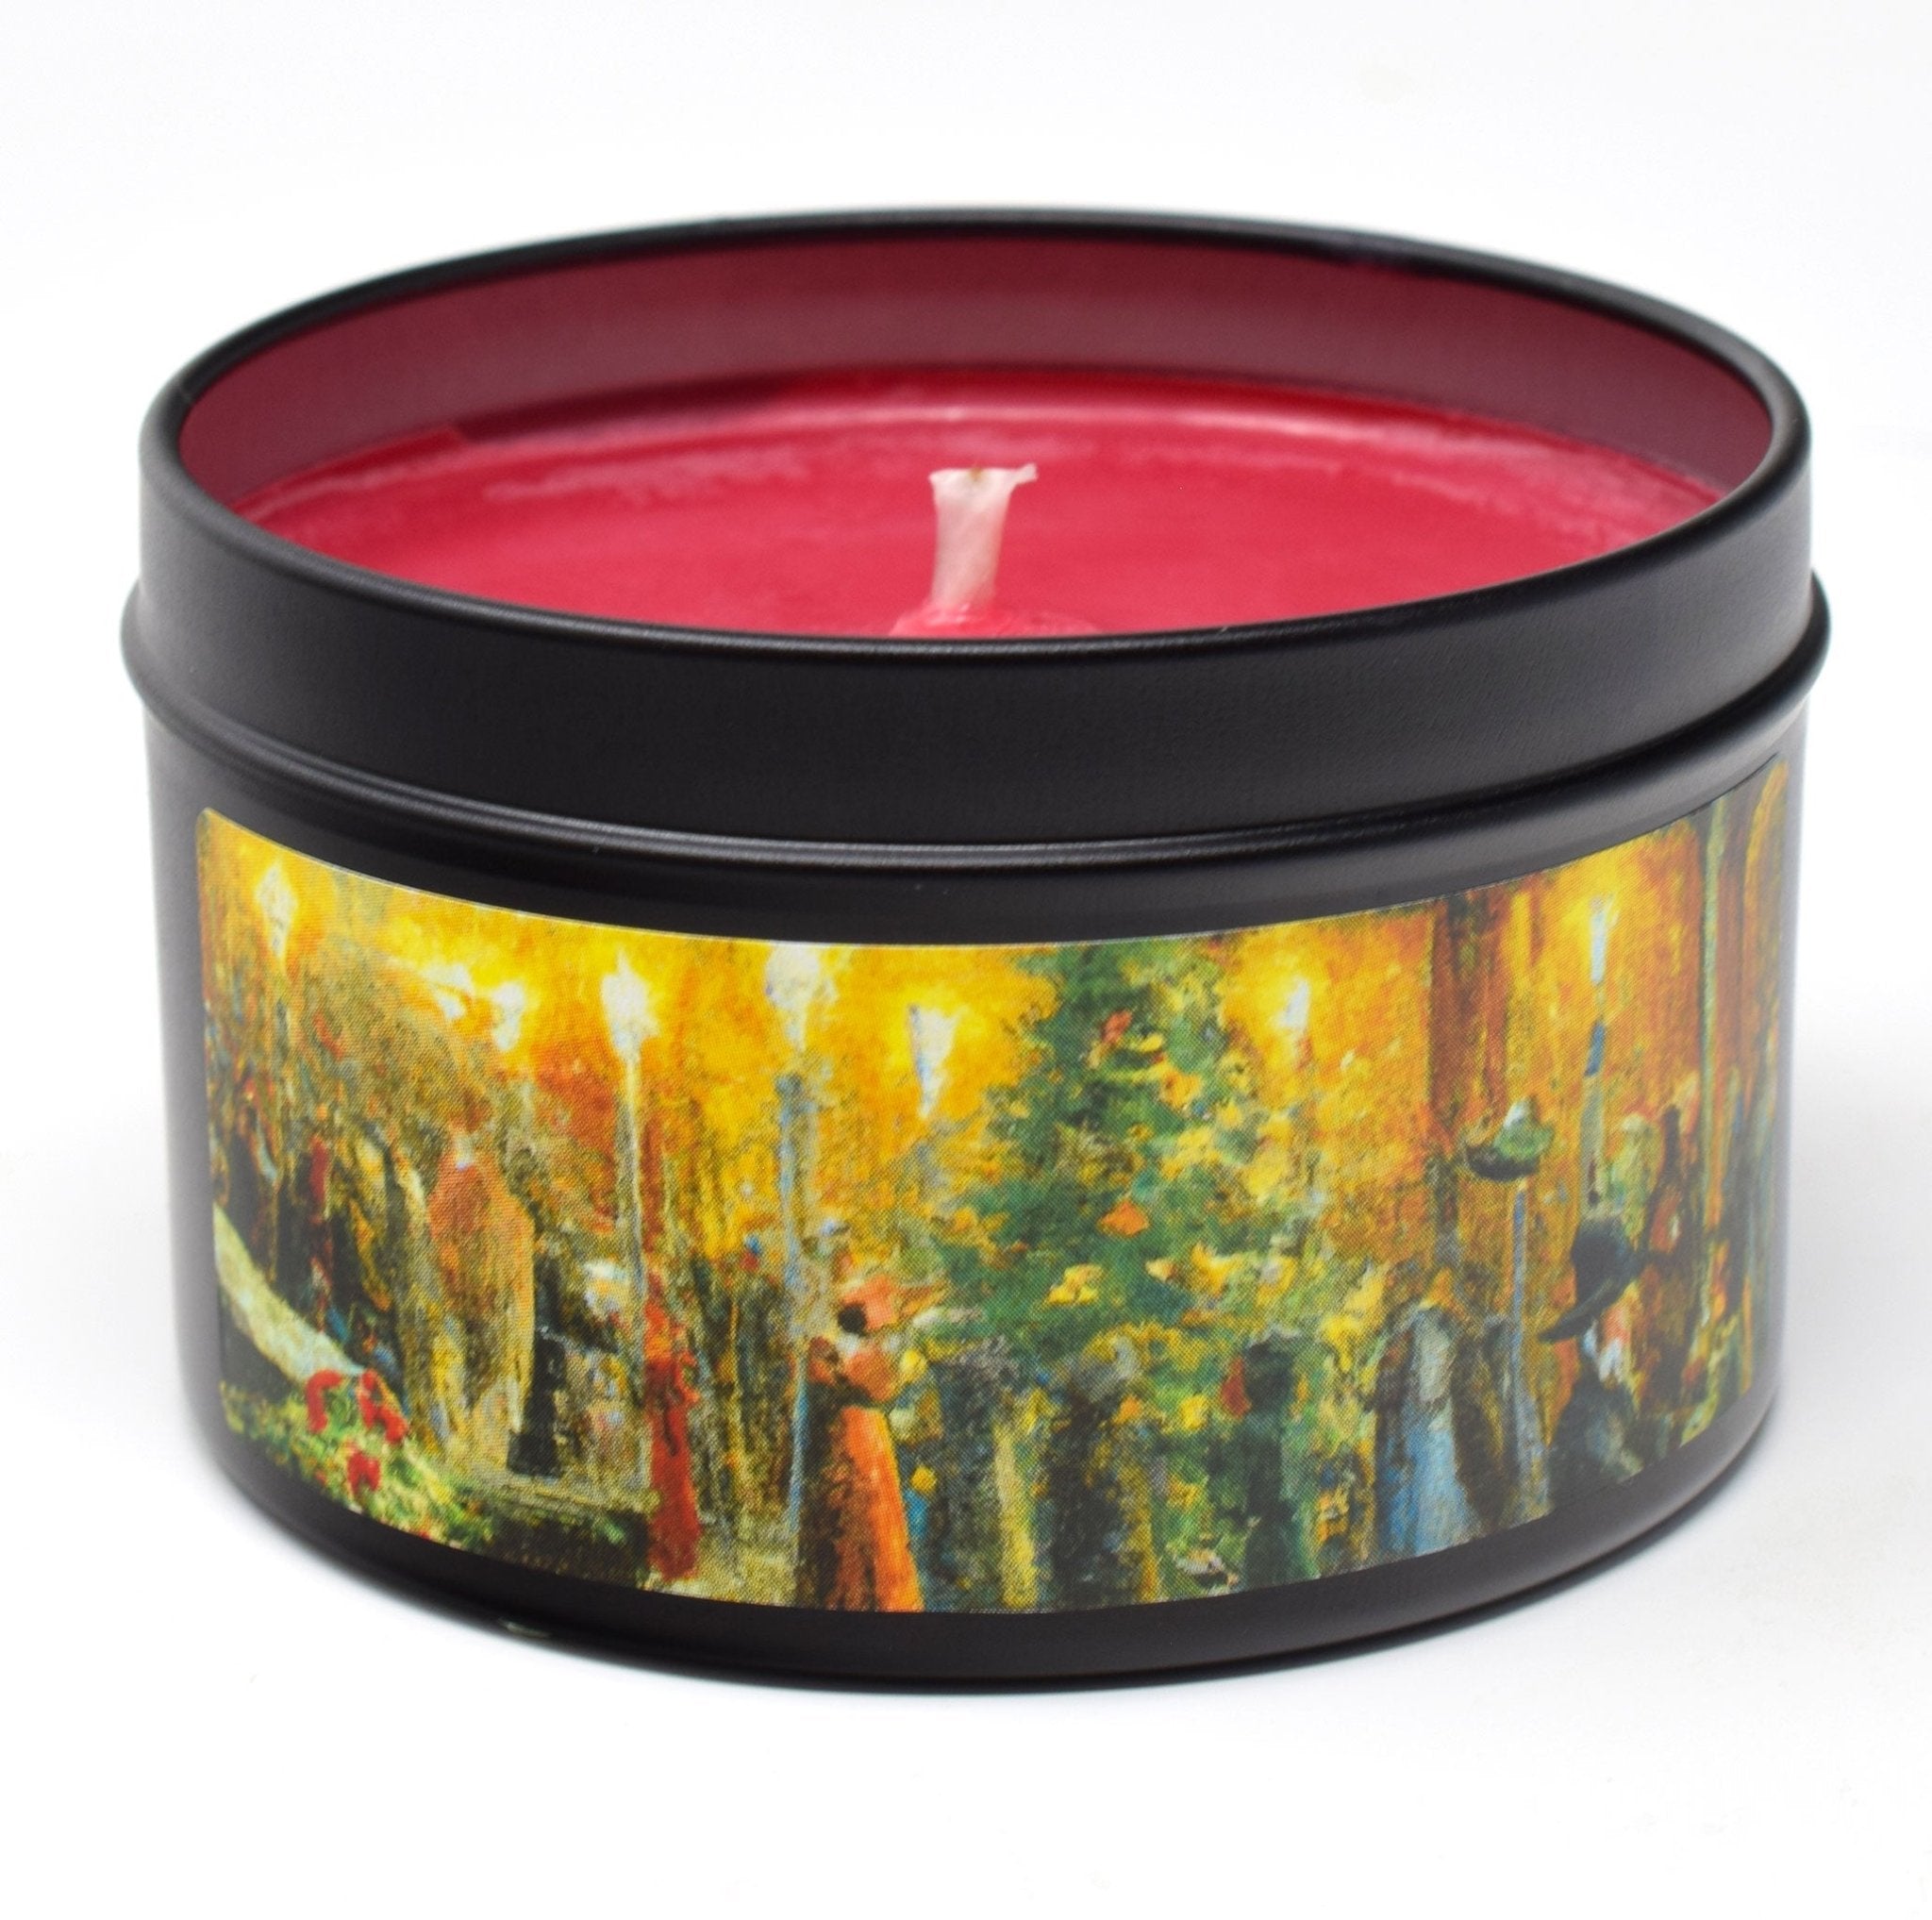 Victorian Christmas, 6oz Soy Candle Tin - Candeo Candle